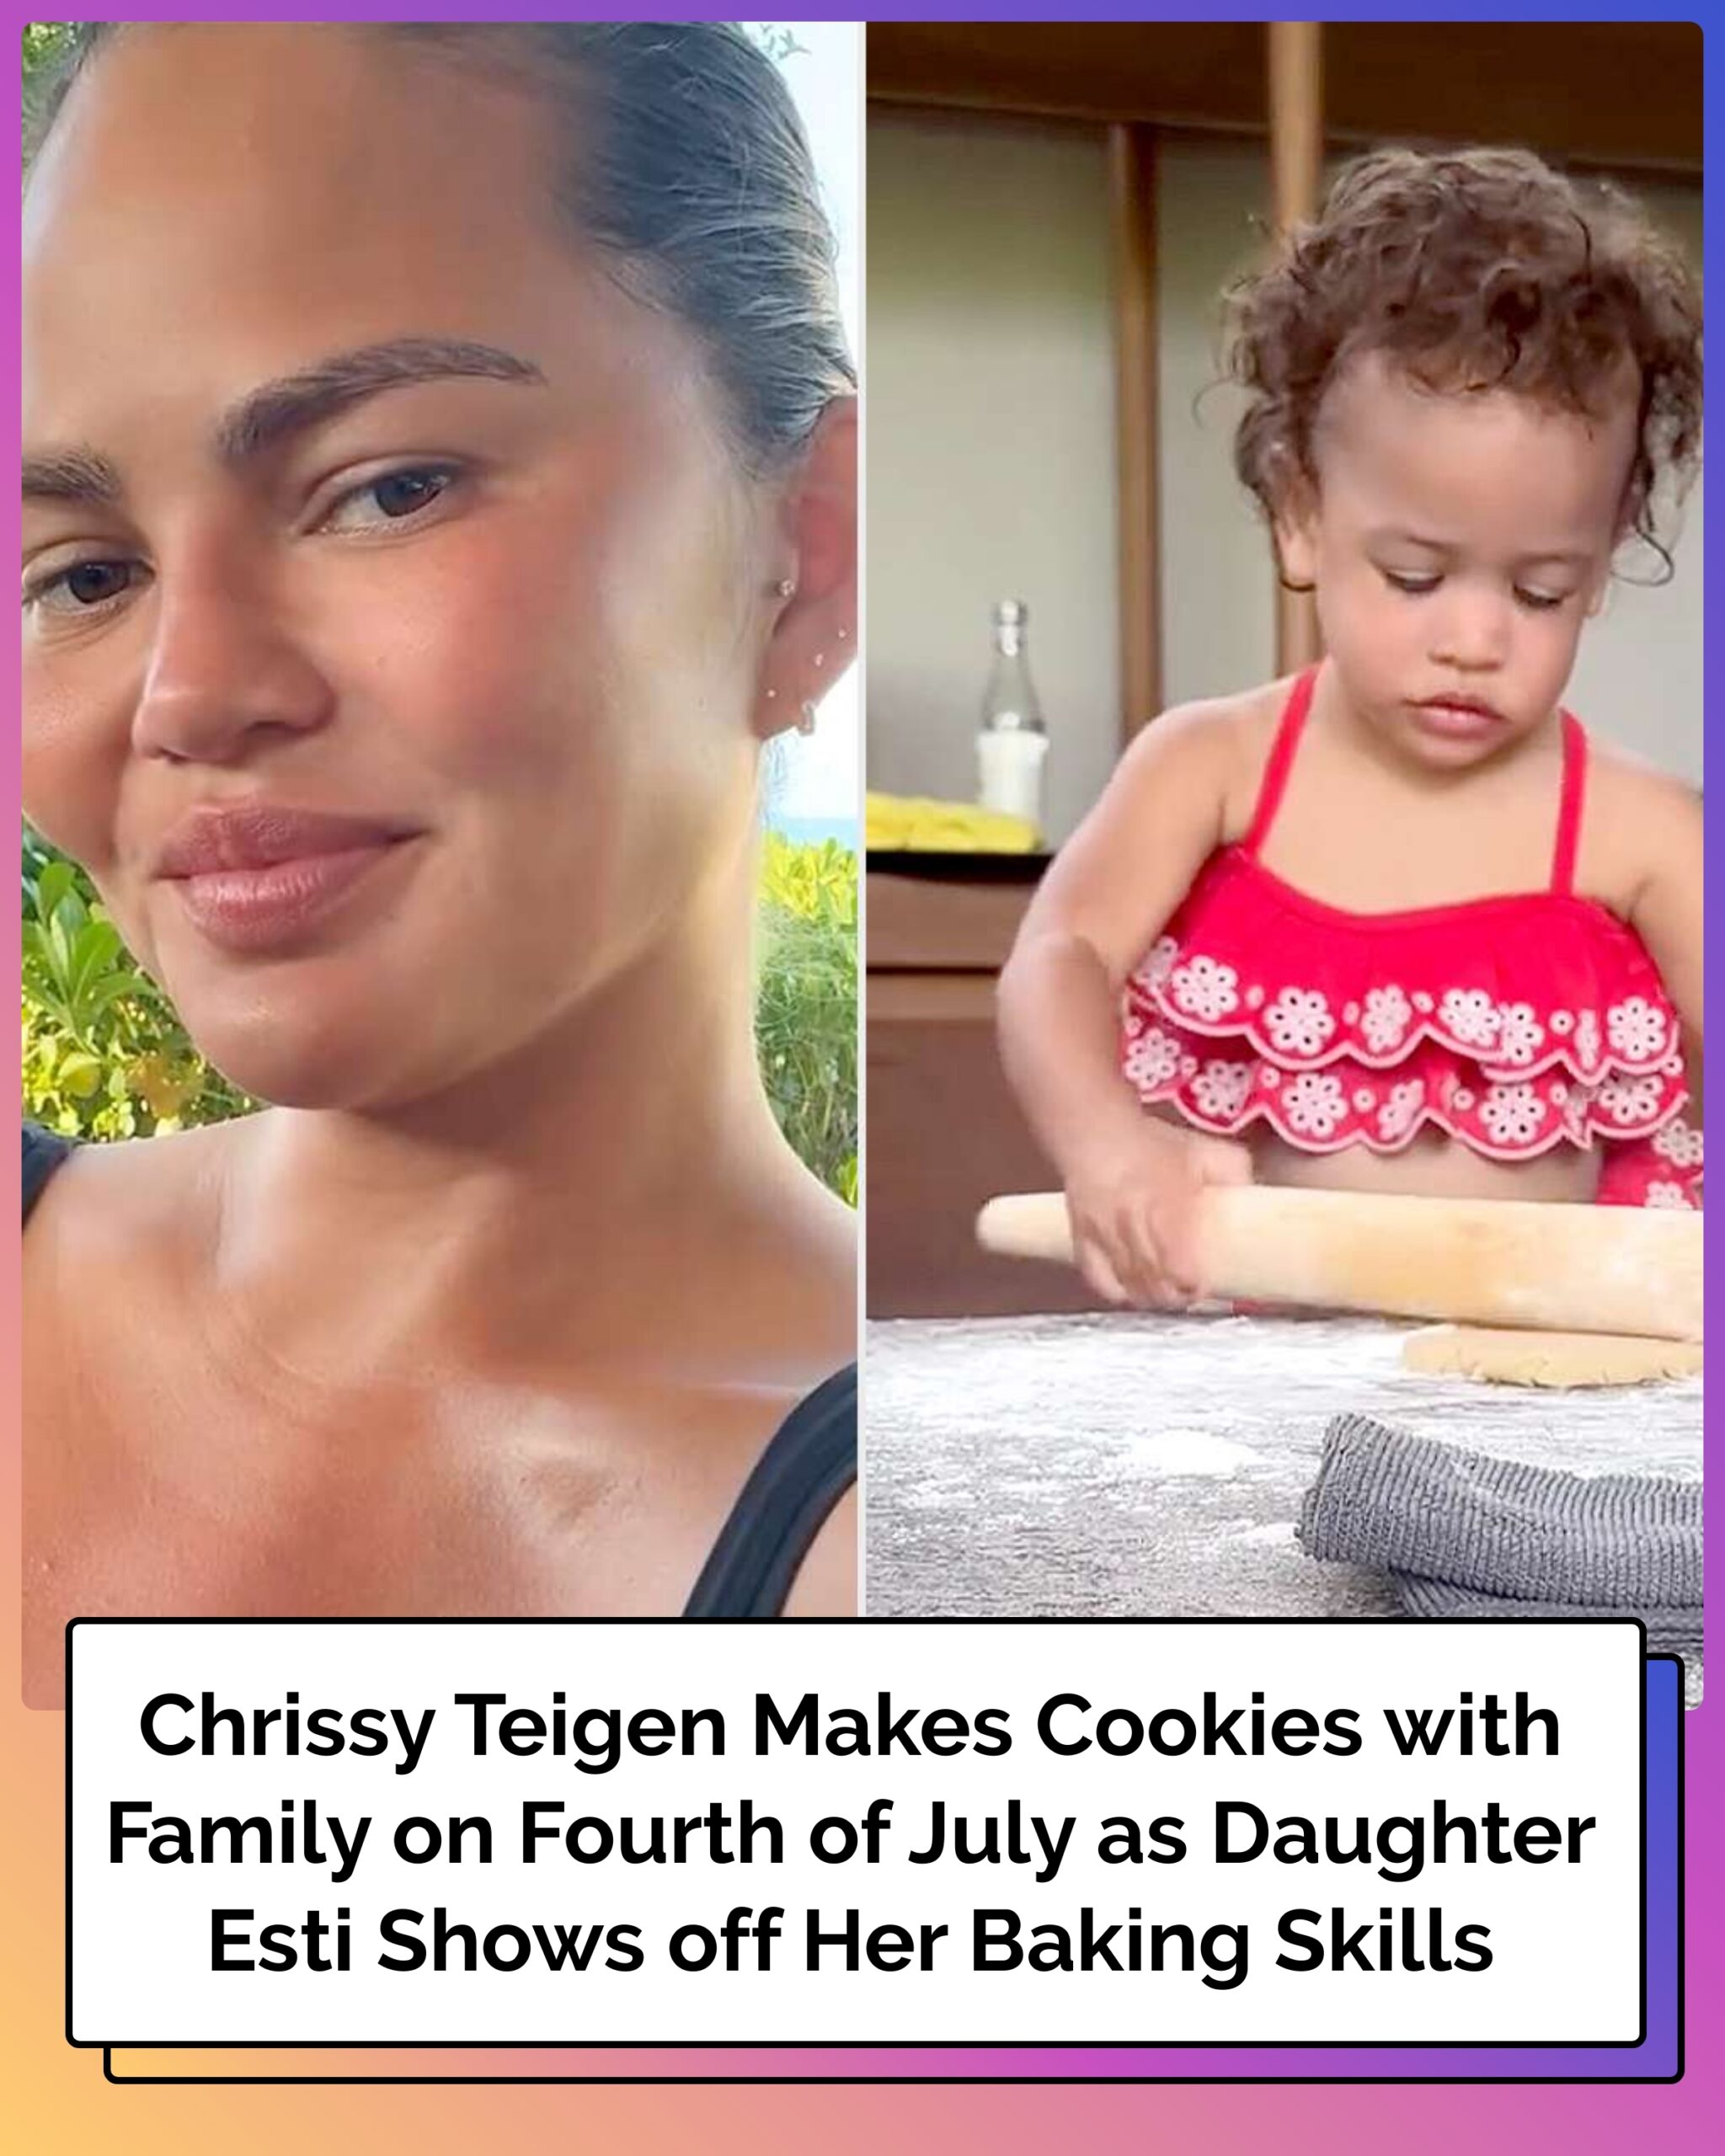 Chrissy Teigen Makes Cookies with Family on Fourth of July as Daughter Esti Shows off Her Baking Skills